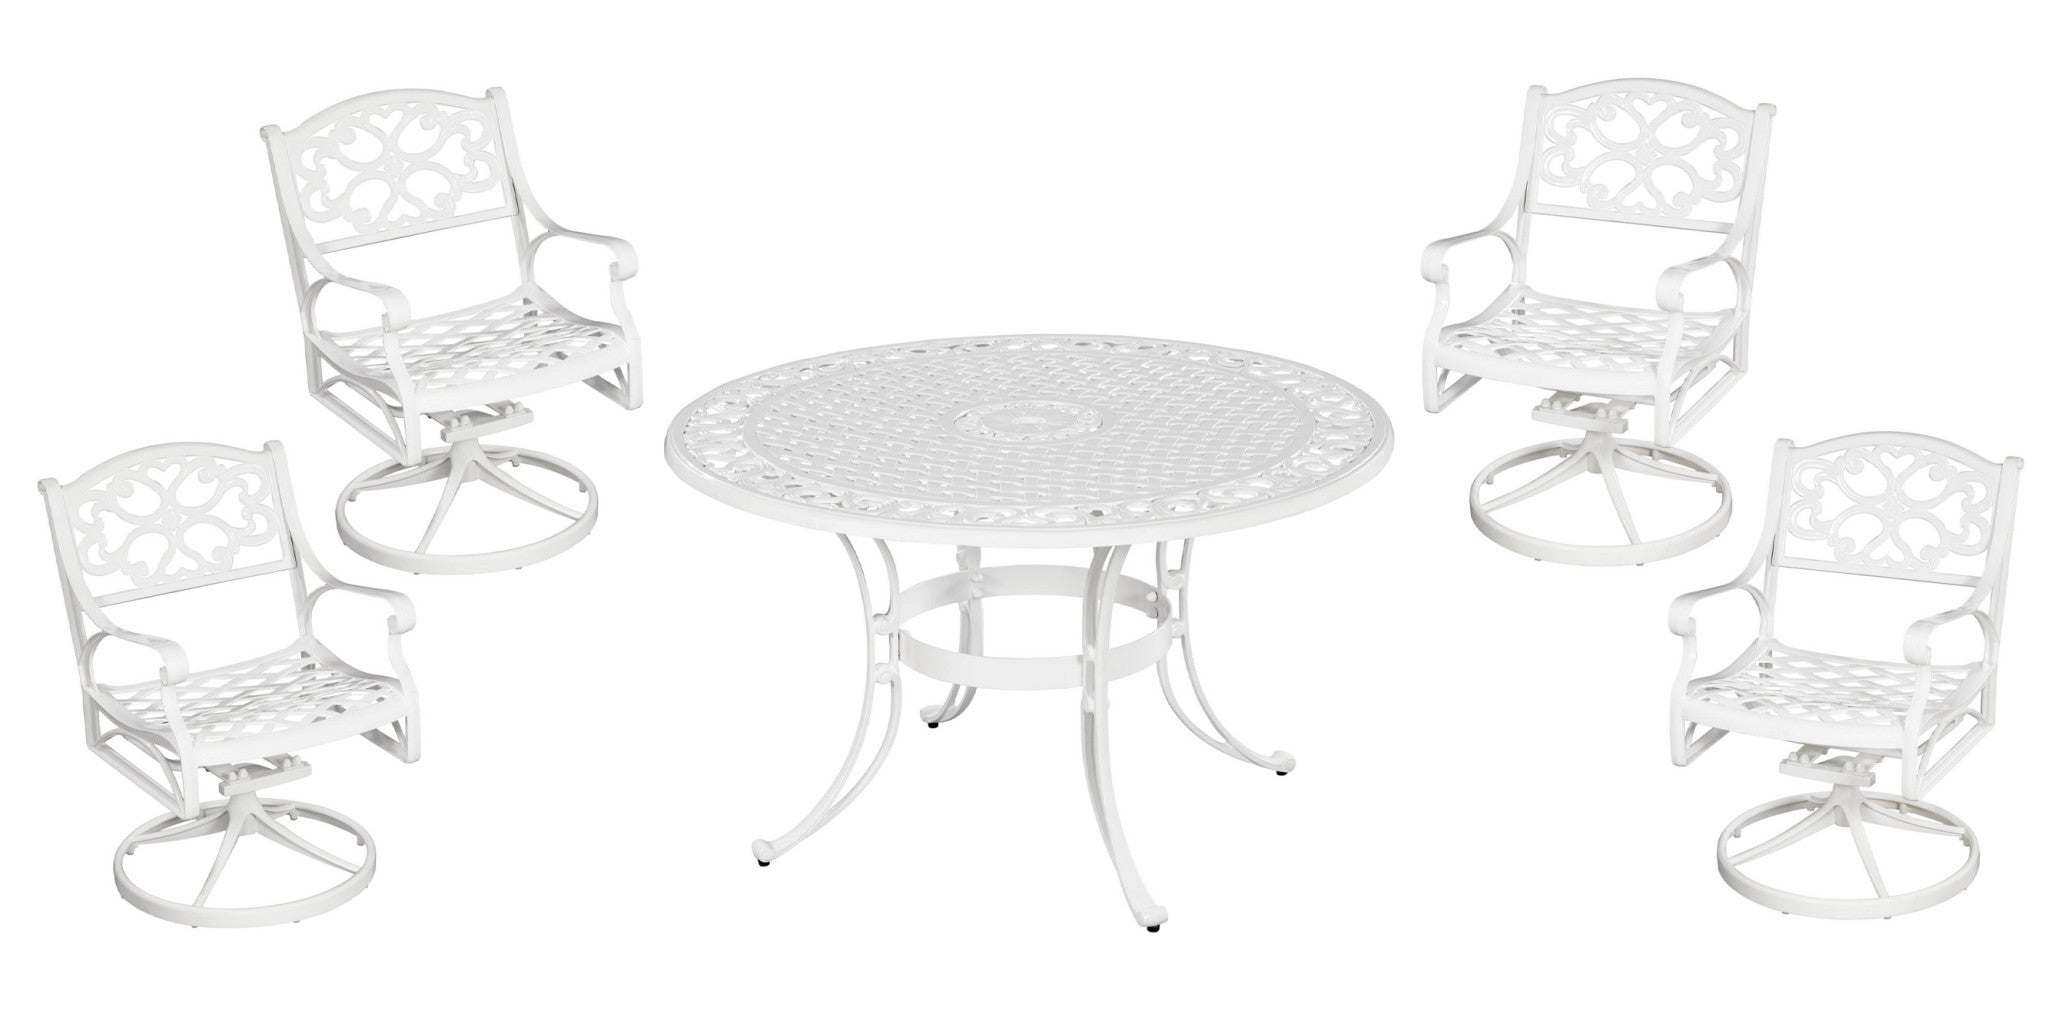 Sanibel 5 Piece Outdoor Dining Set by Homestyles - White - Aluminum - 6652-305